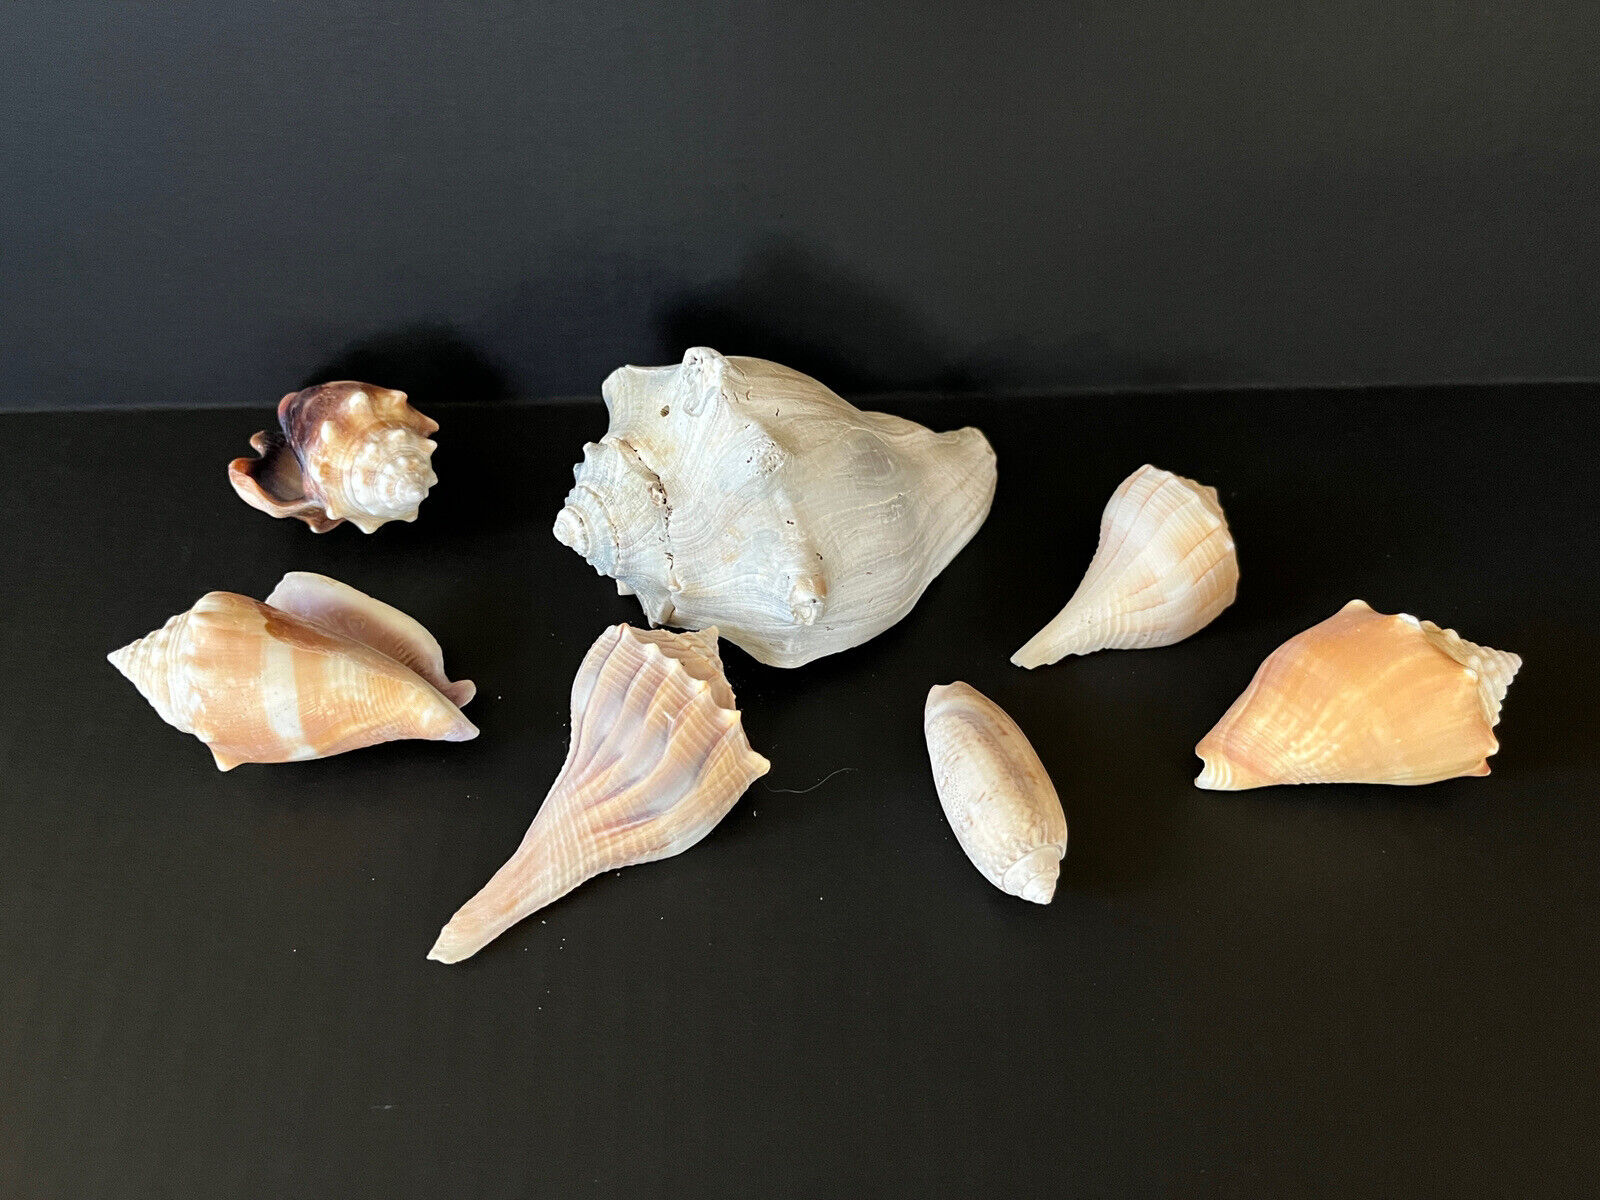 Lot of 7 Sea Shells Mixed Marco Island FL Assortment Whelk Conchs Humanely Found